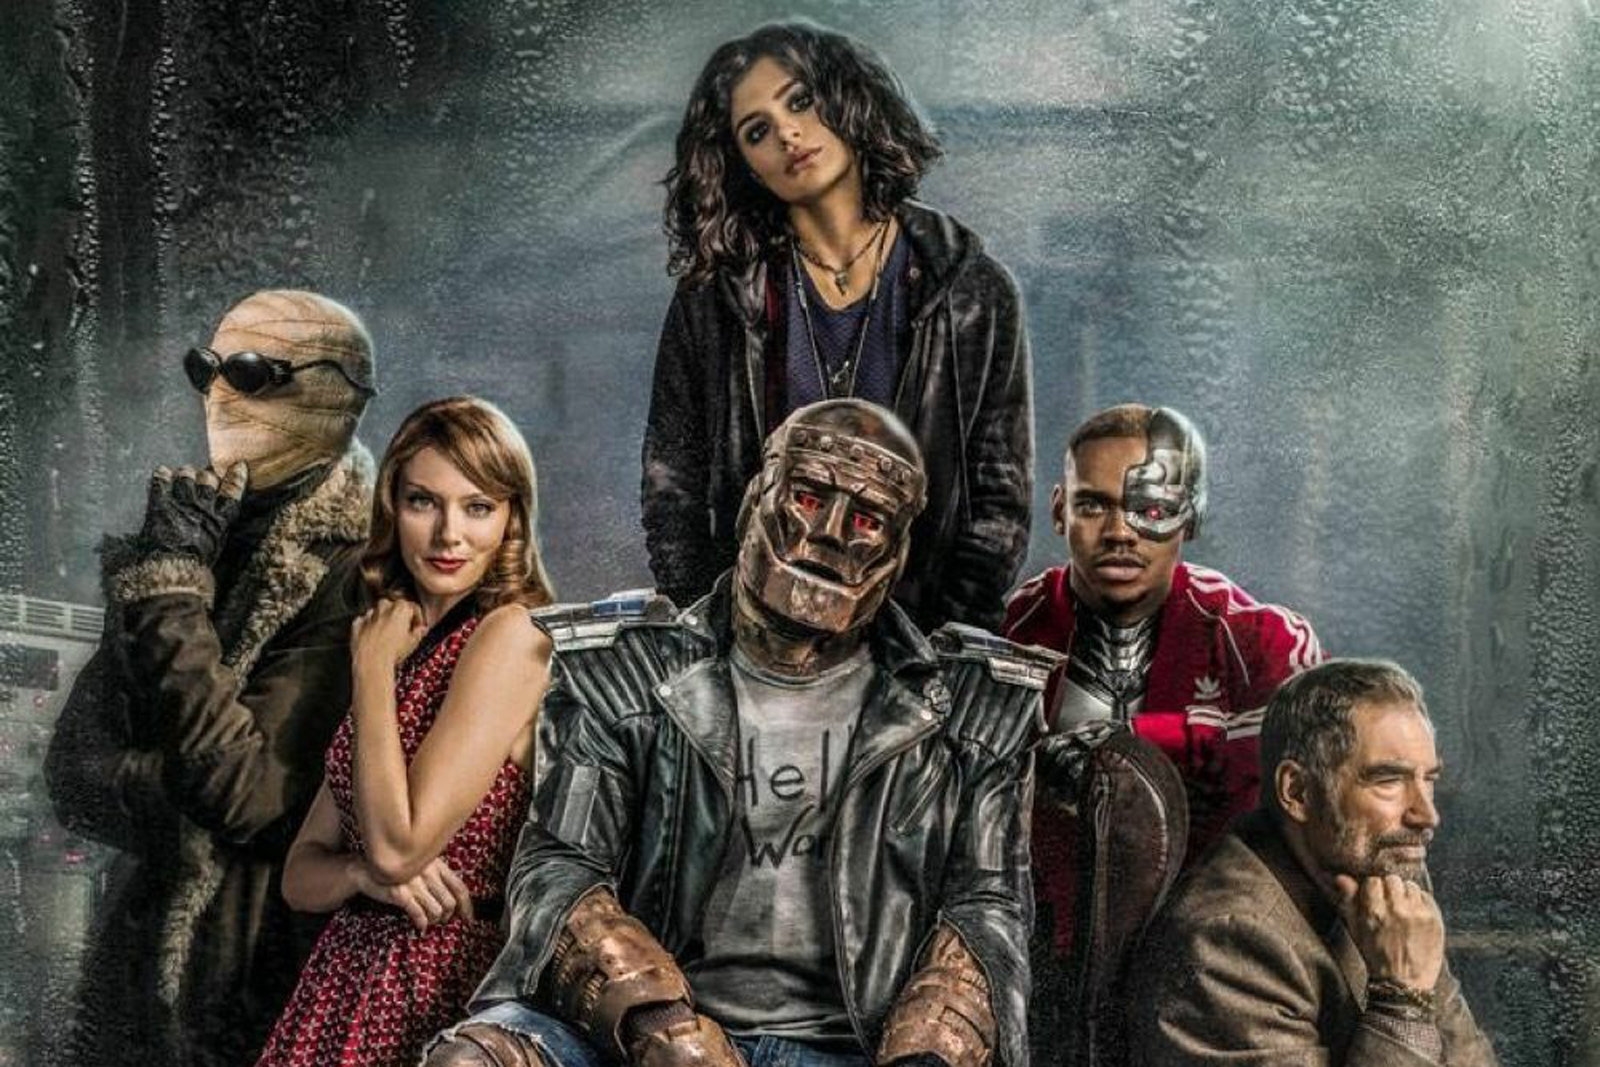 Second season of DC's 'Doom Patrol' will also stream on HBO Max | DeviceDaily.com